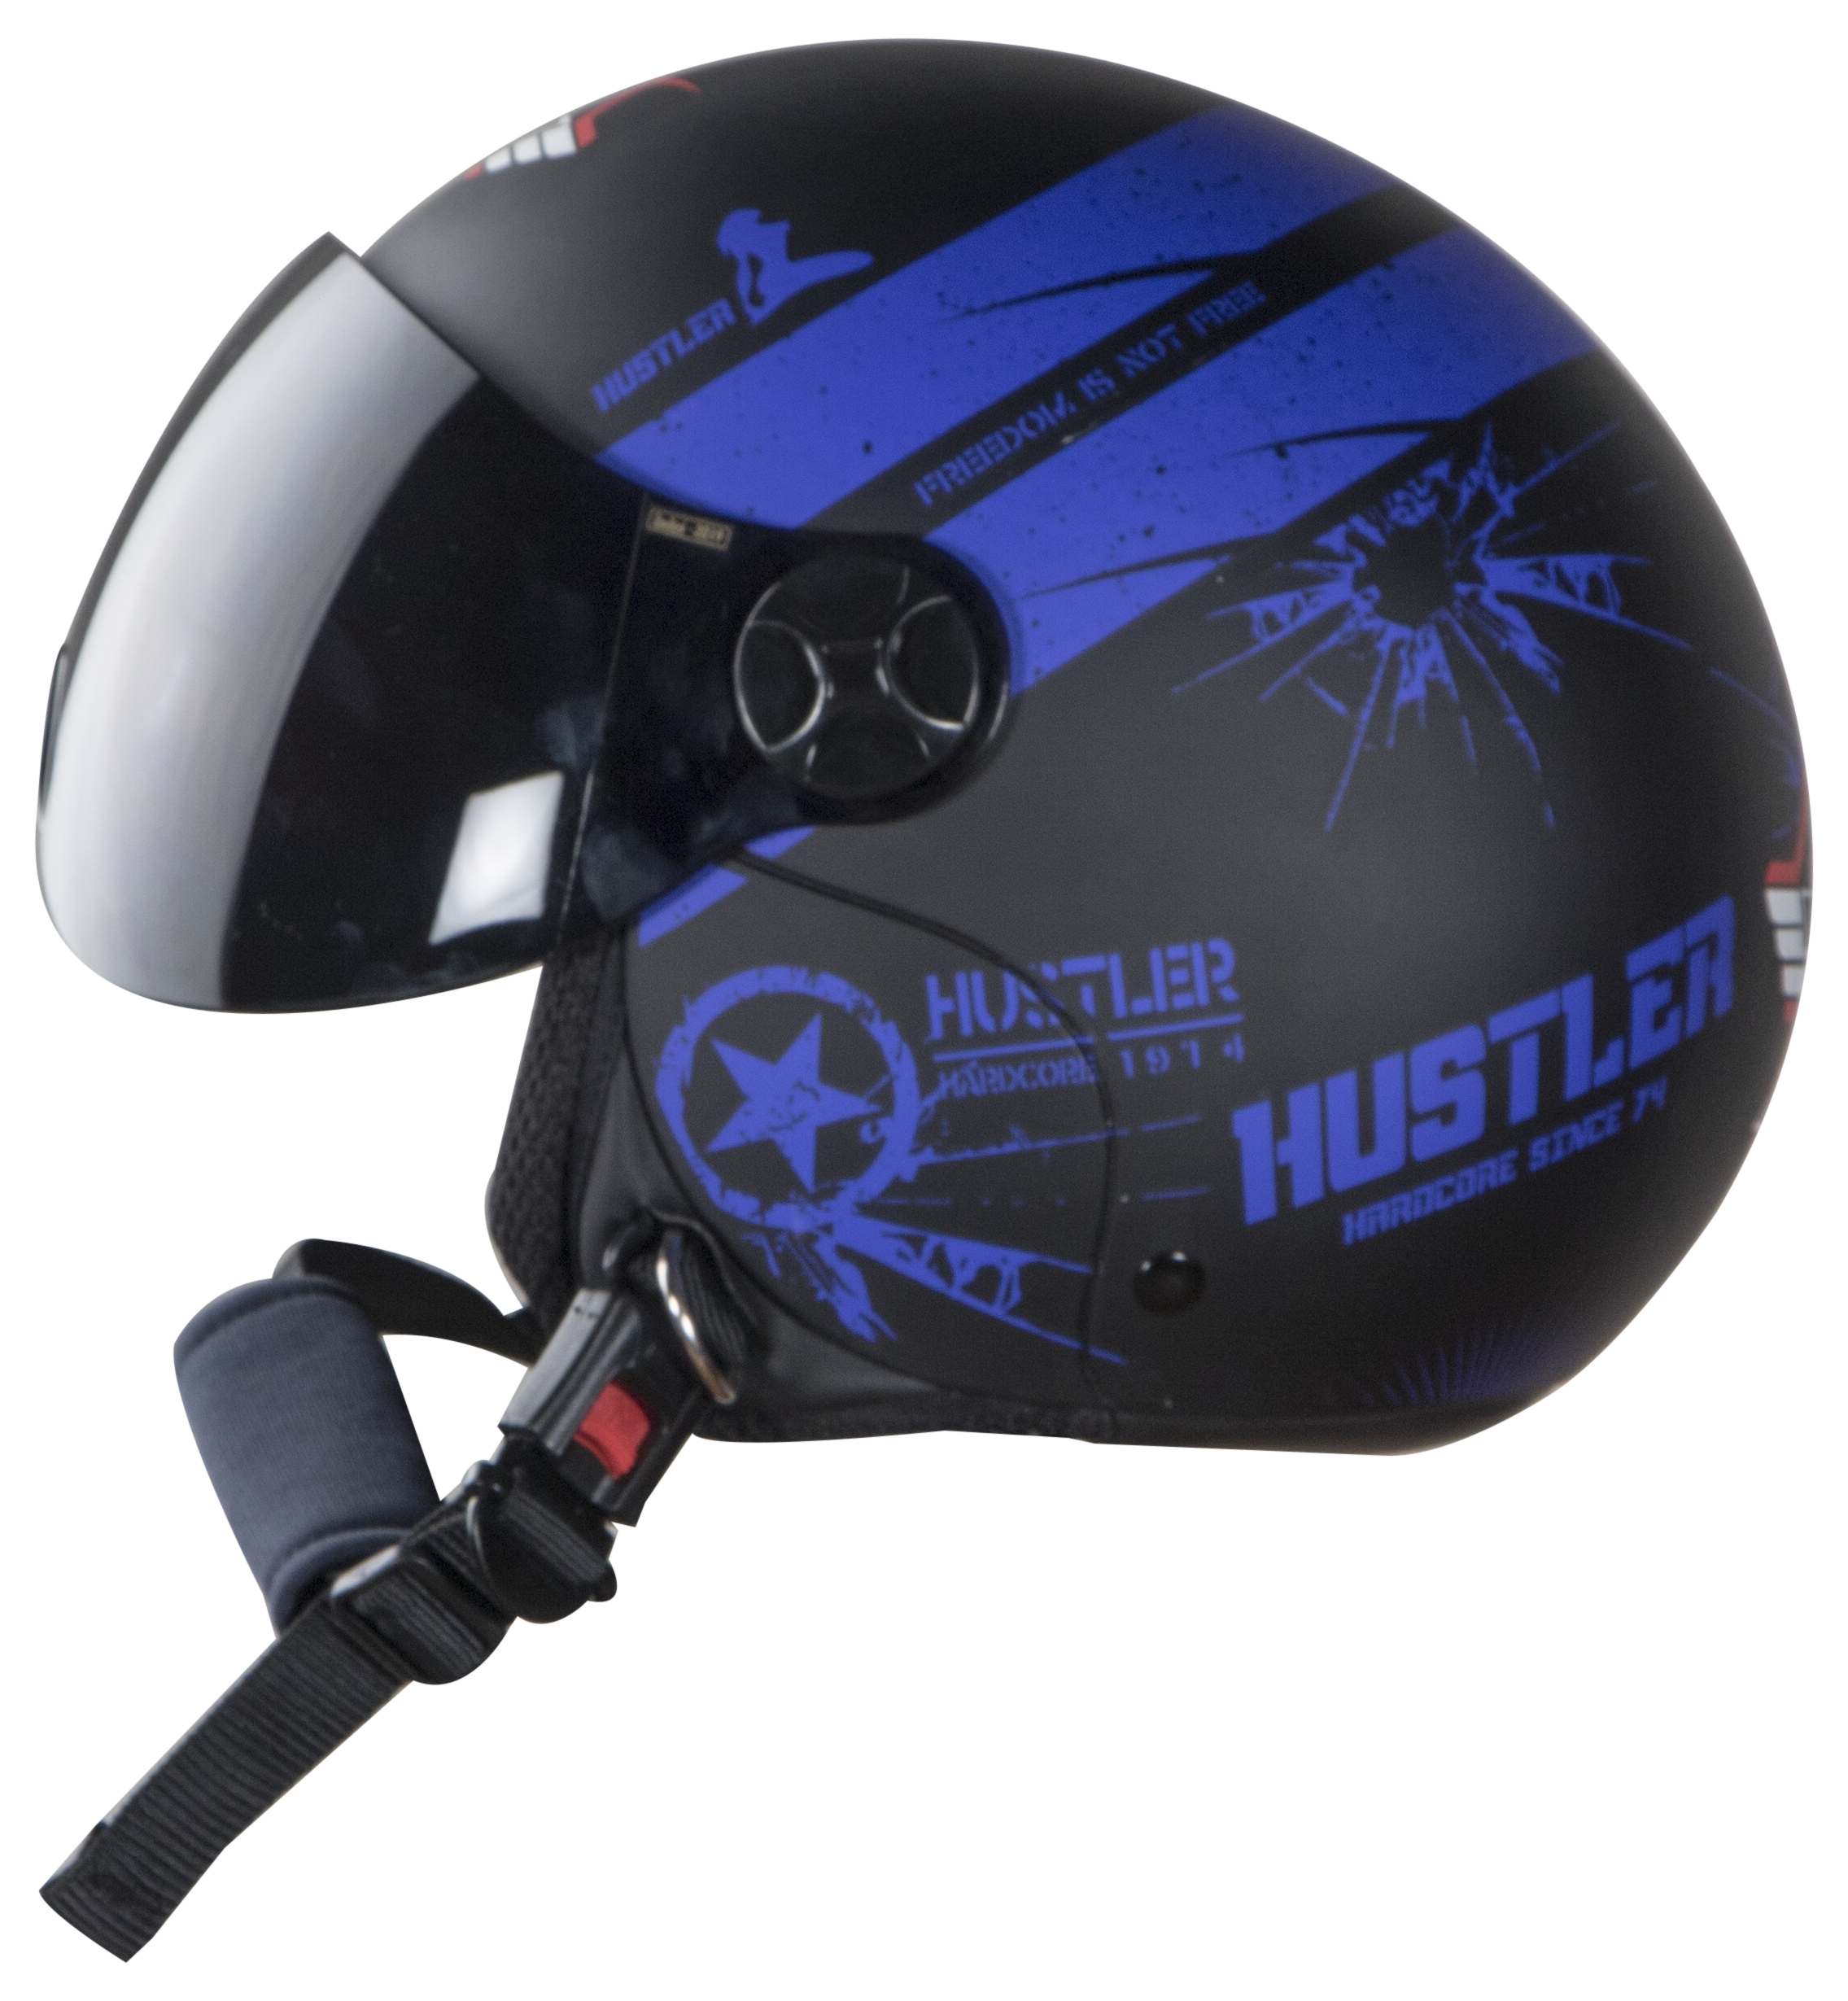 SBH-16 Hustler Mat Black With Blue( Fitted With Clear Visor Extra Smoke Visor Free)